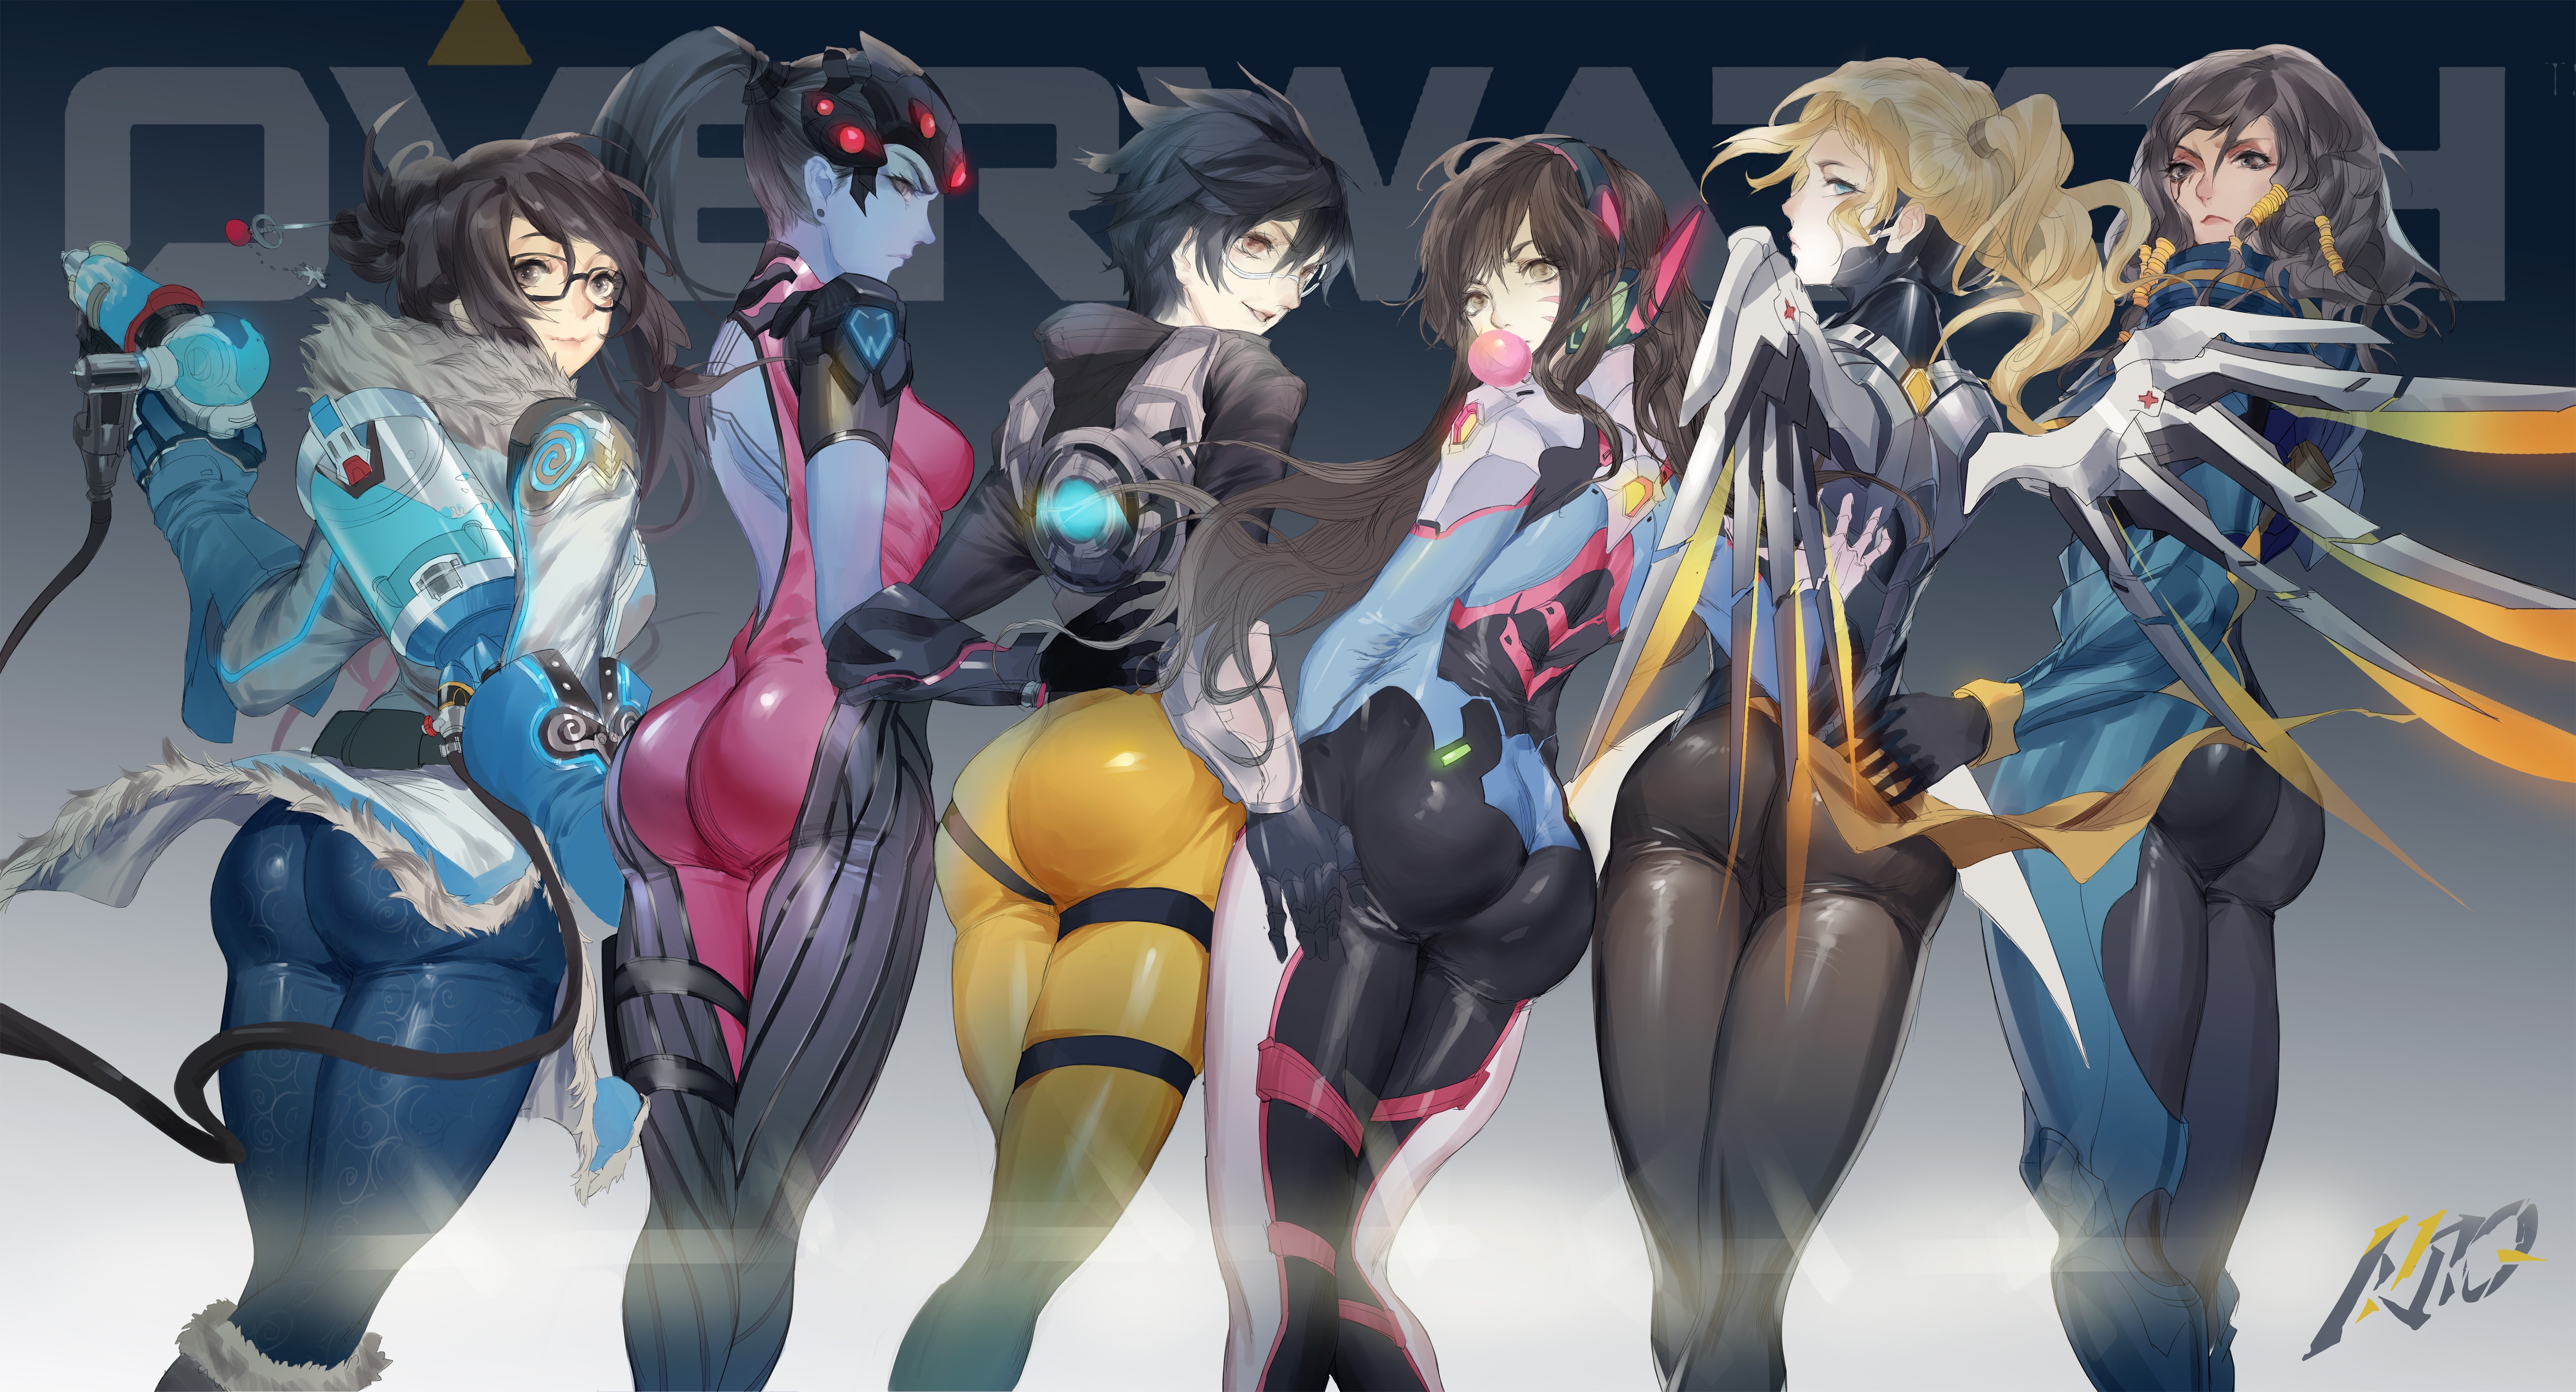 Anime 5552x3000 anime anime girls D.Va (Overwatch) Mei (Overwatch) Mercy (Overwatch) Tracer (Overwatch) Widowmaker (Overwatch) ass bodysuit gun weapon headphones wings long hair short hair glasses blonde black hair brunette Pharah (Overwatch) rear view group of asses PC gaming video game girls food sweets bubble gum video game characters standing